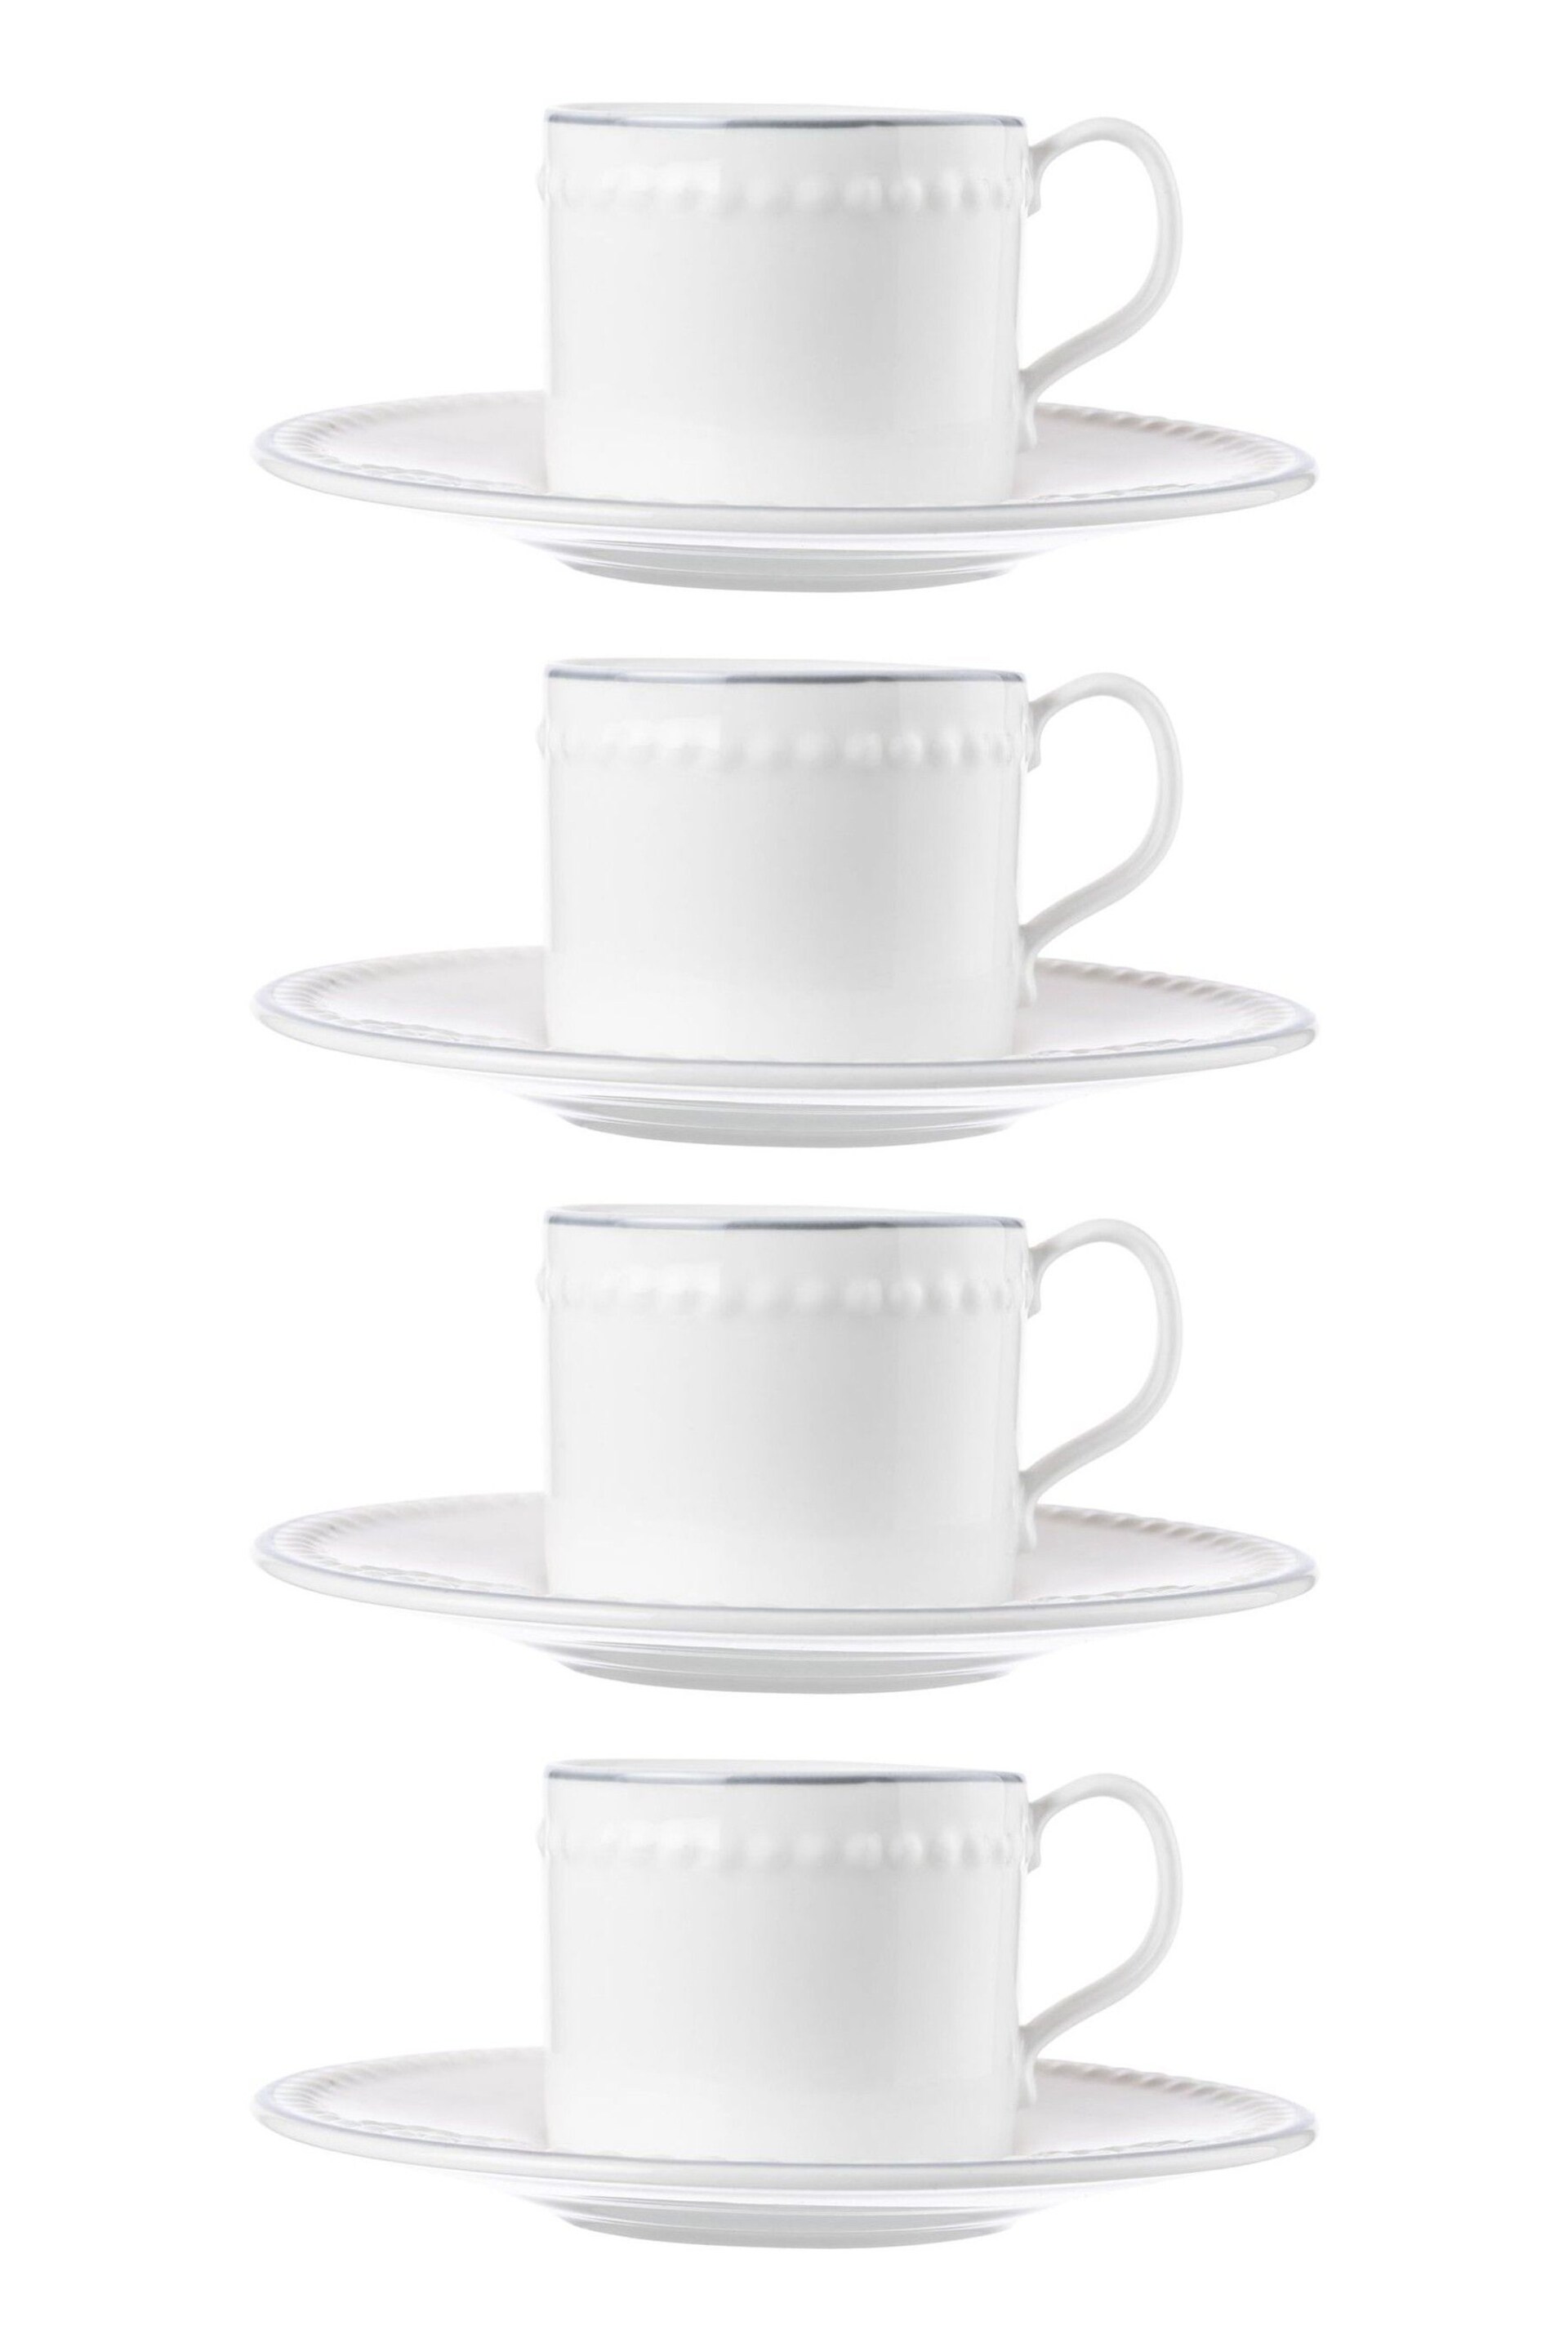 Mary Berry Set of 4 White Signature Espresso Cup & Saucers - Image 2 of 3